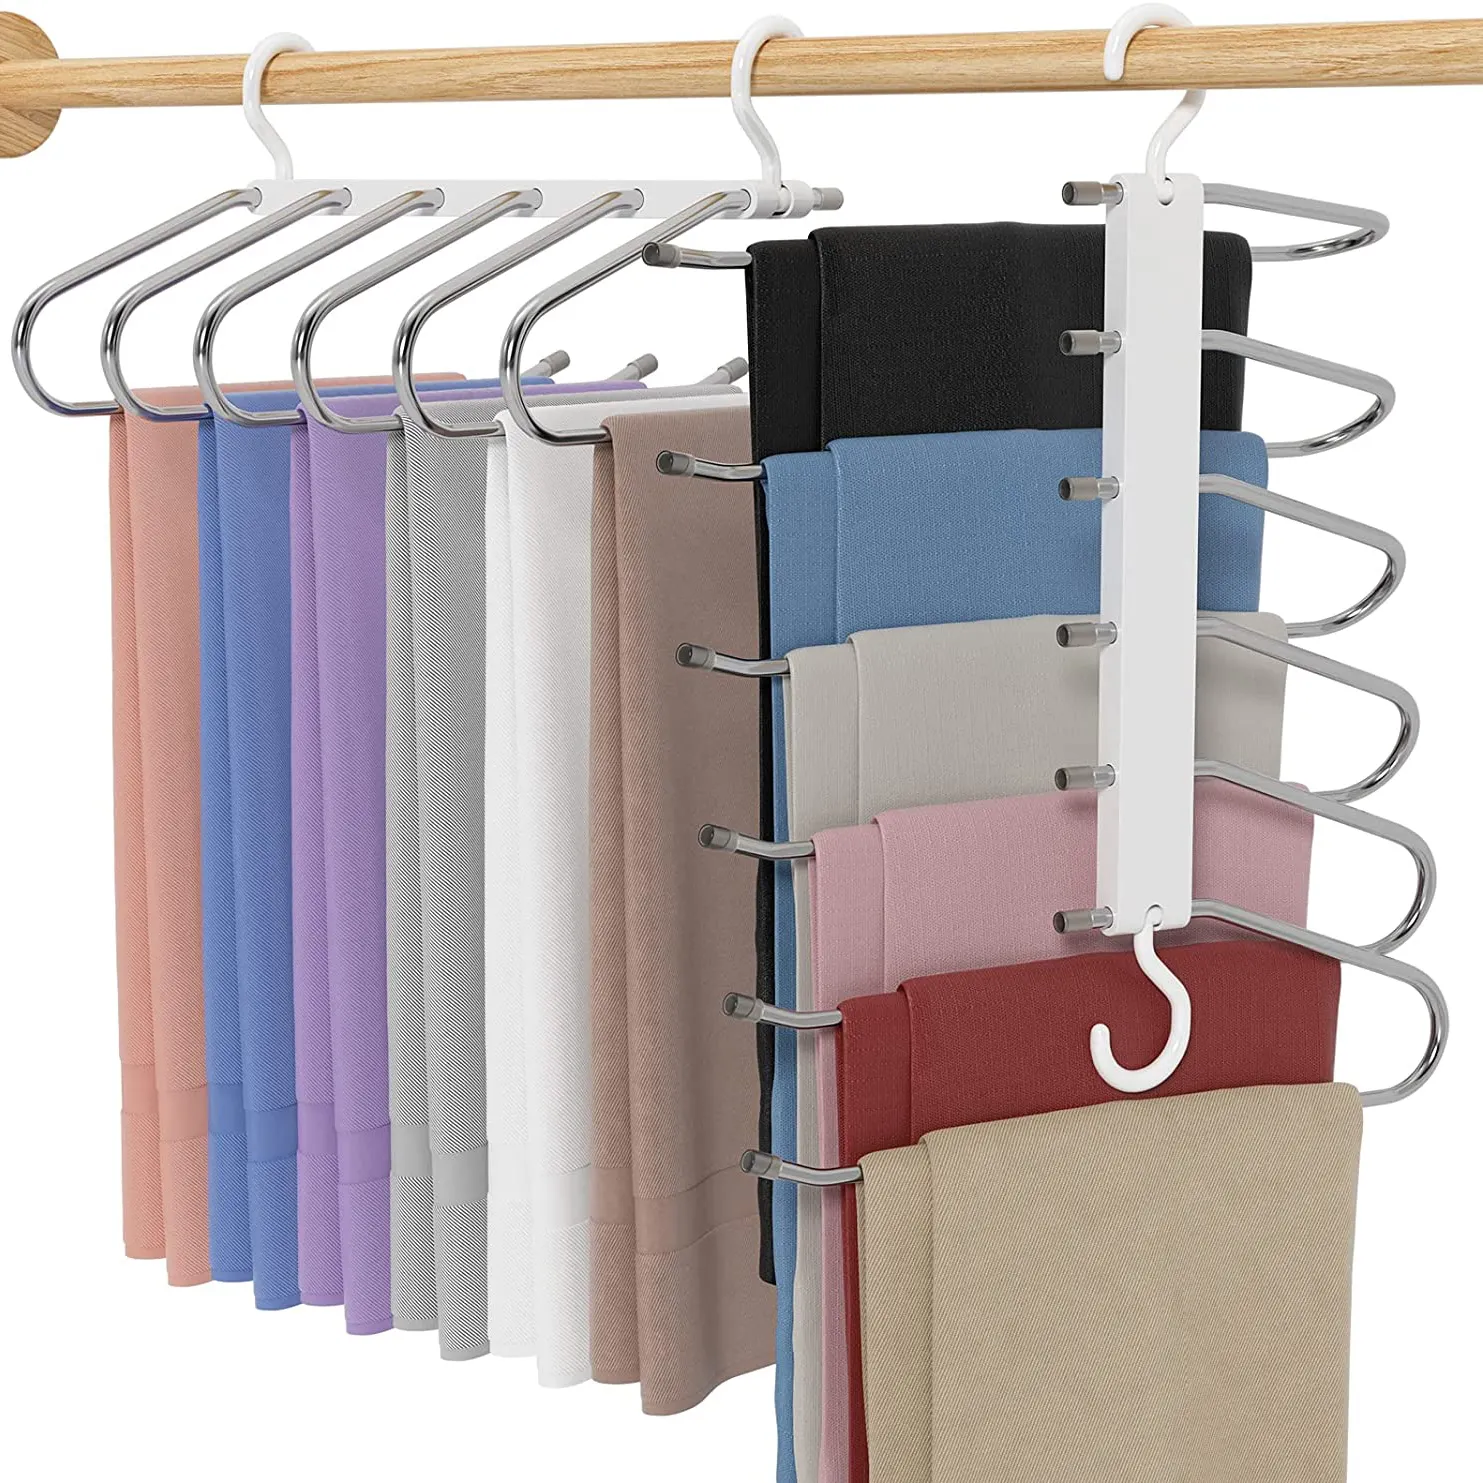 Pants Hangers 2 Pack Stainless Steel 6 Layers Magic Pants Hanger Rack Slack Trousers Hanger Space Saving Non-Slip Closet Storage